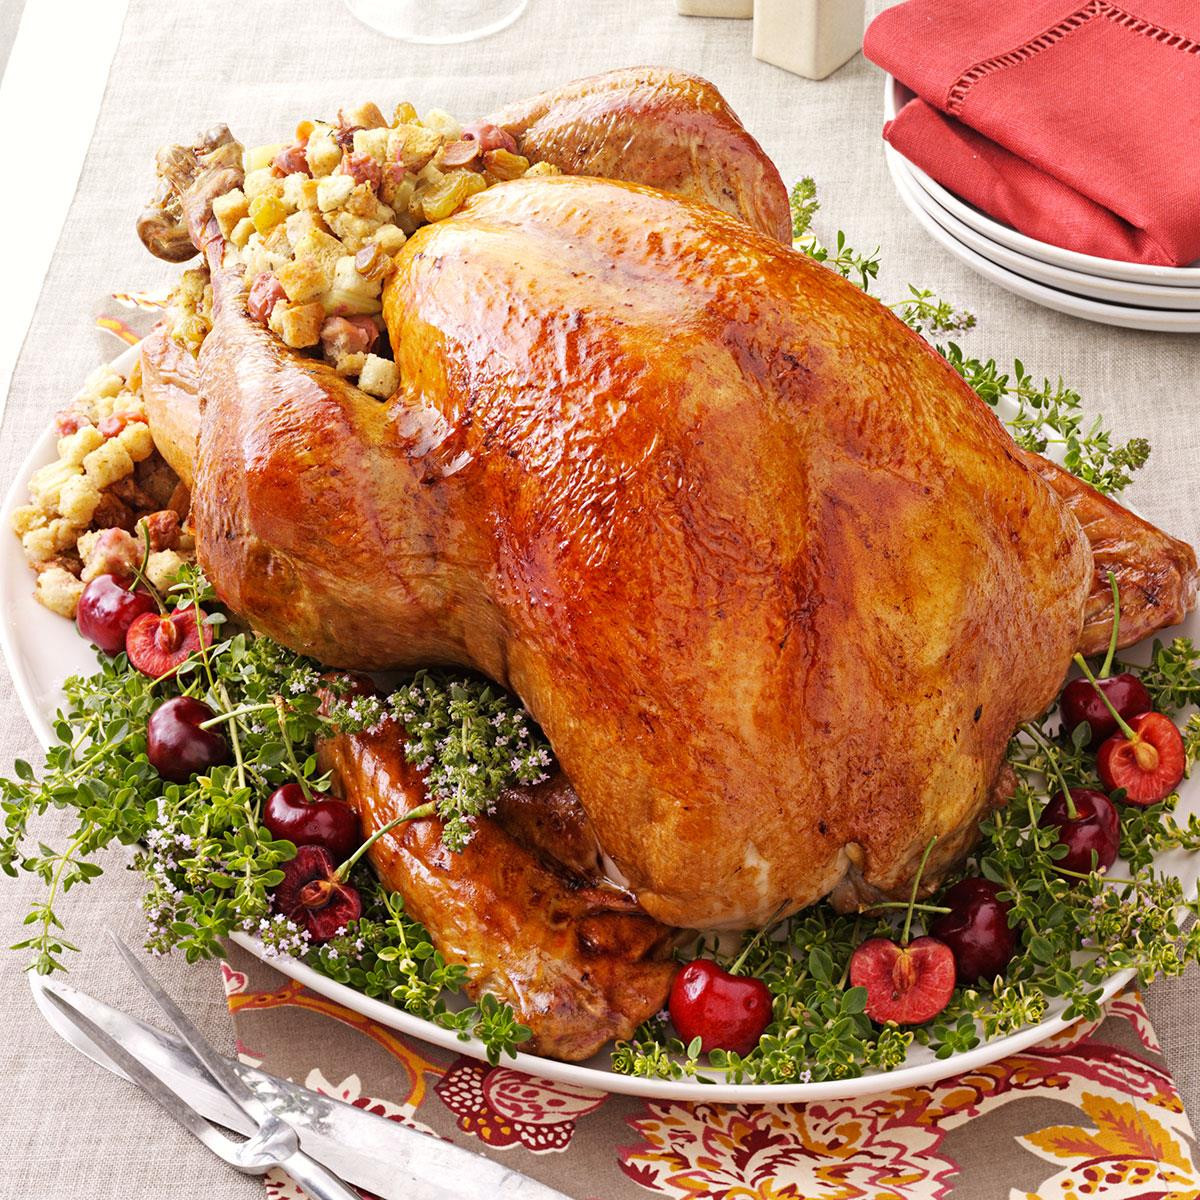 Turkey Stuffing Recipes For Thanksgiving
 Turkey with Cherry Stuffing Recipe